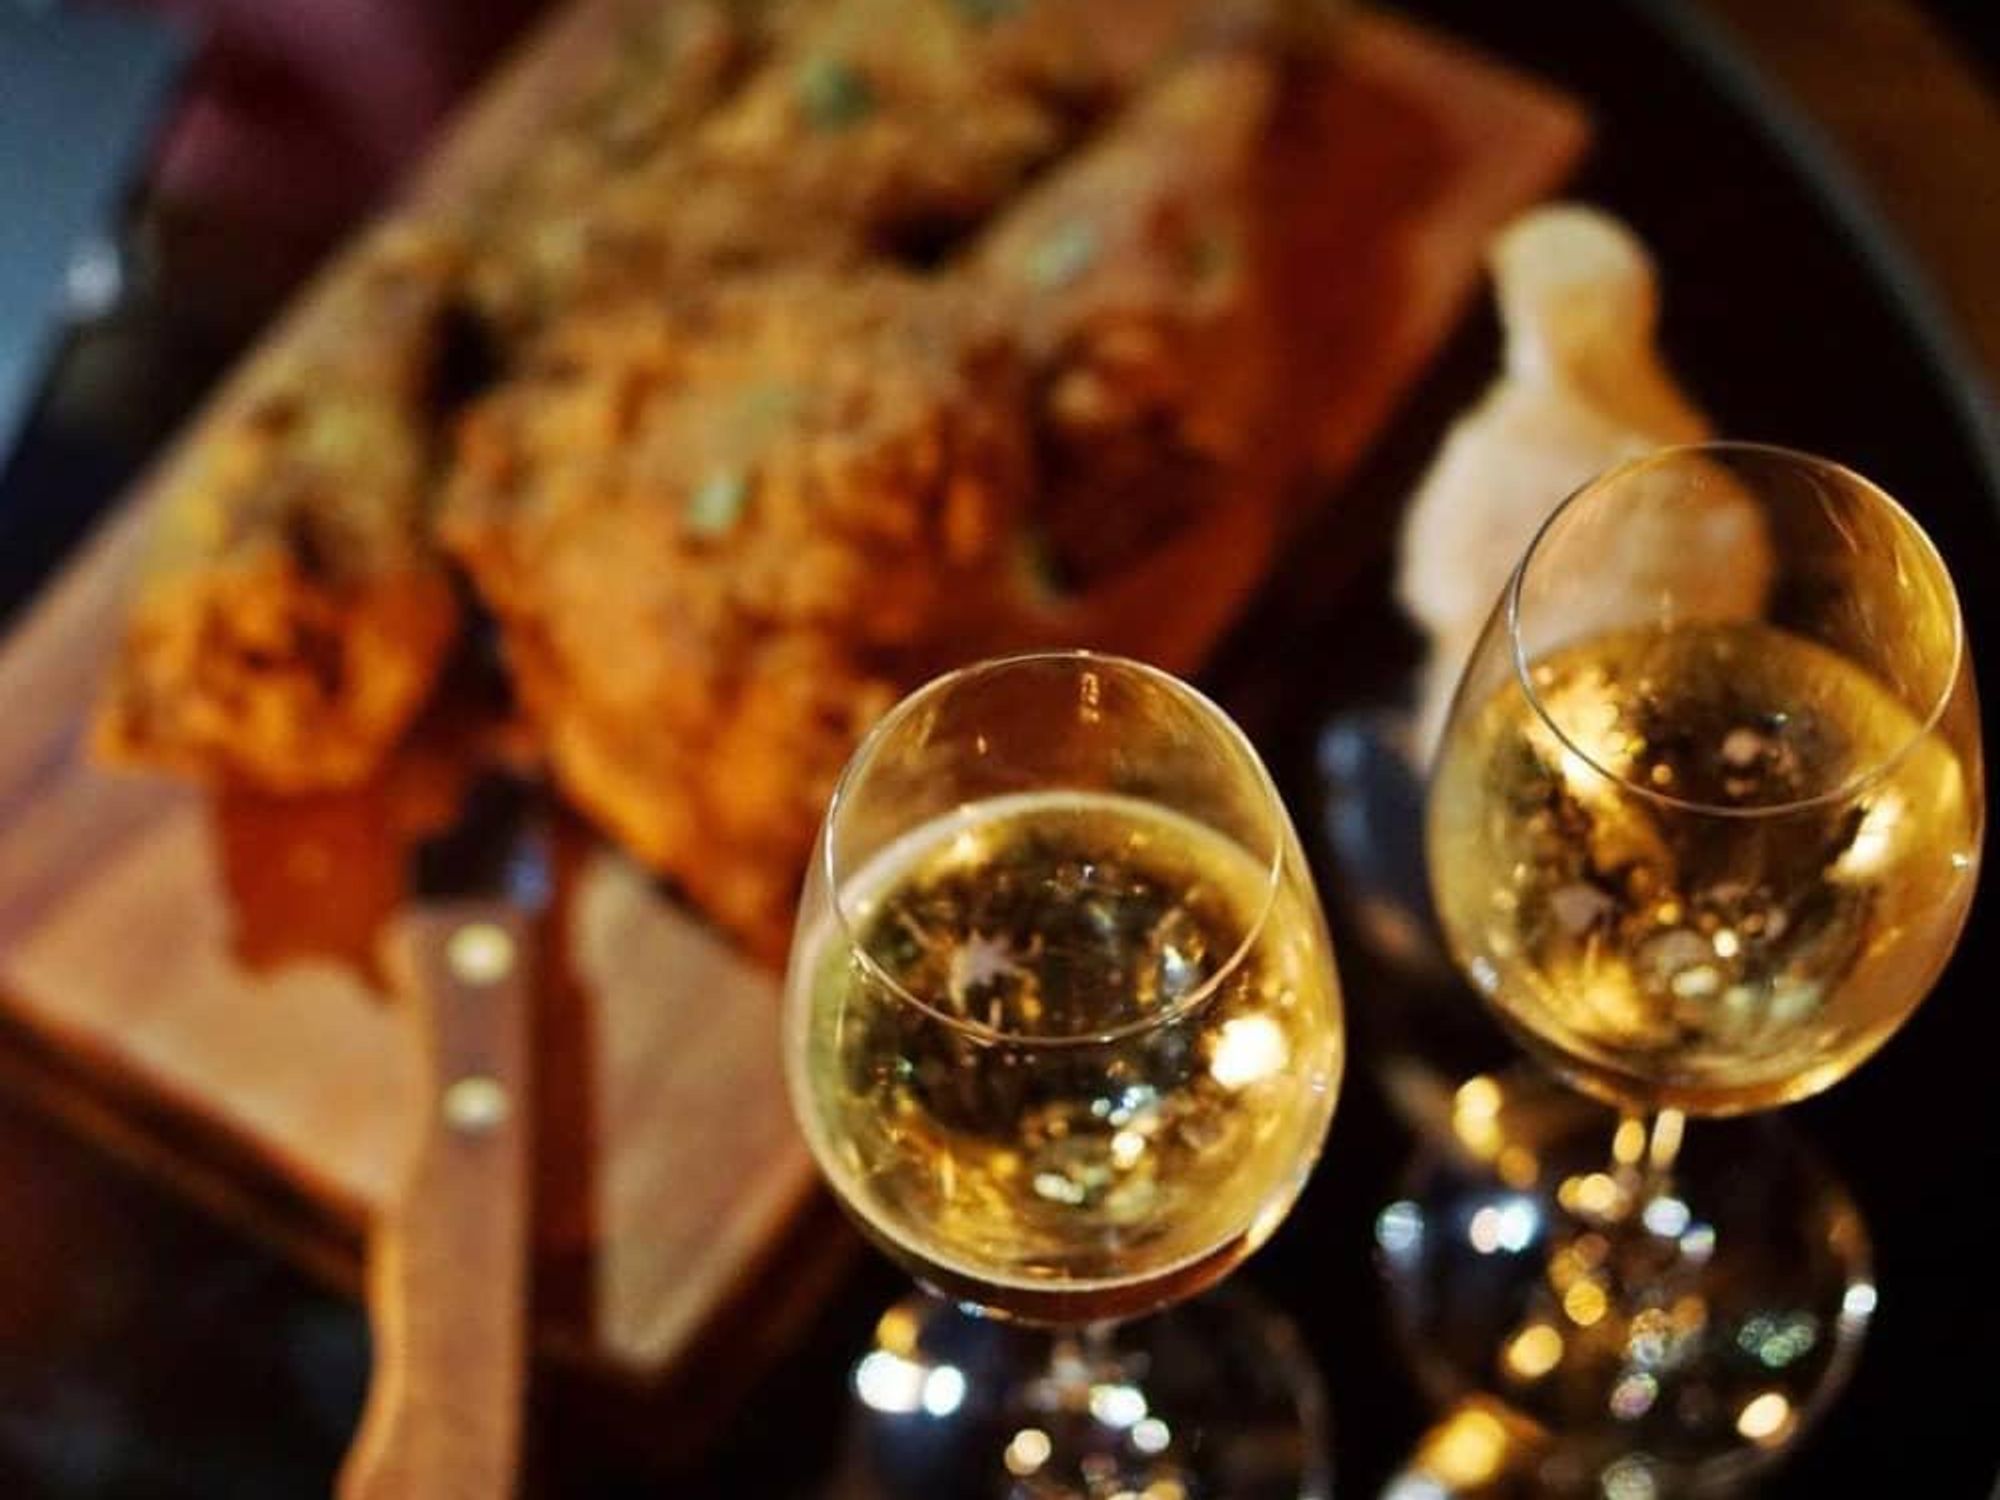 Champagne and Fried Chicken Night Esquire Tavern